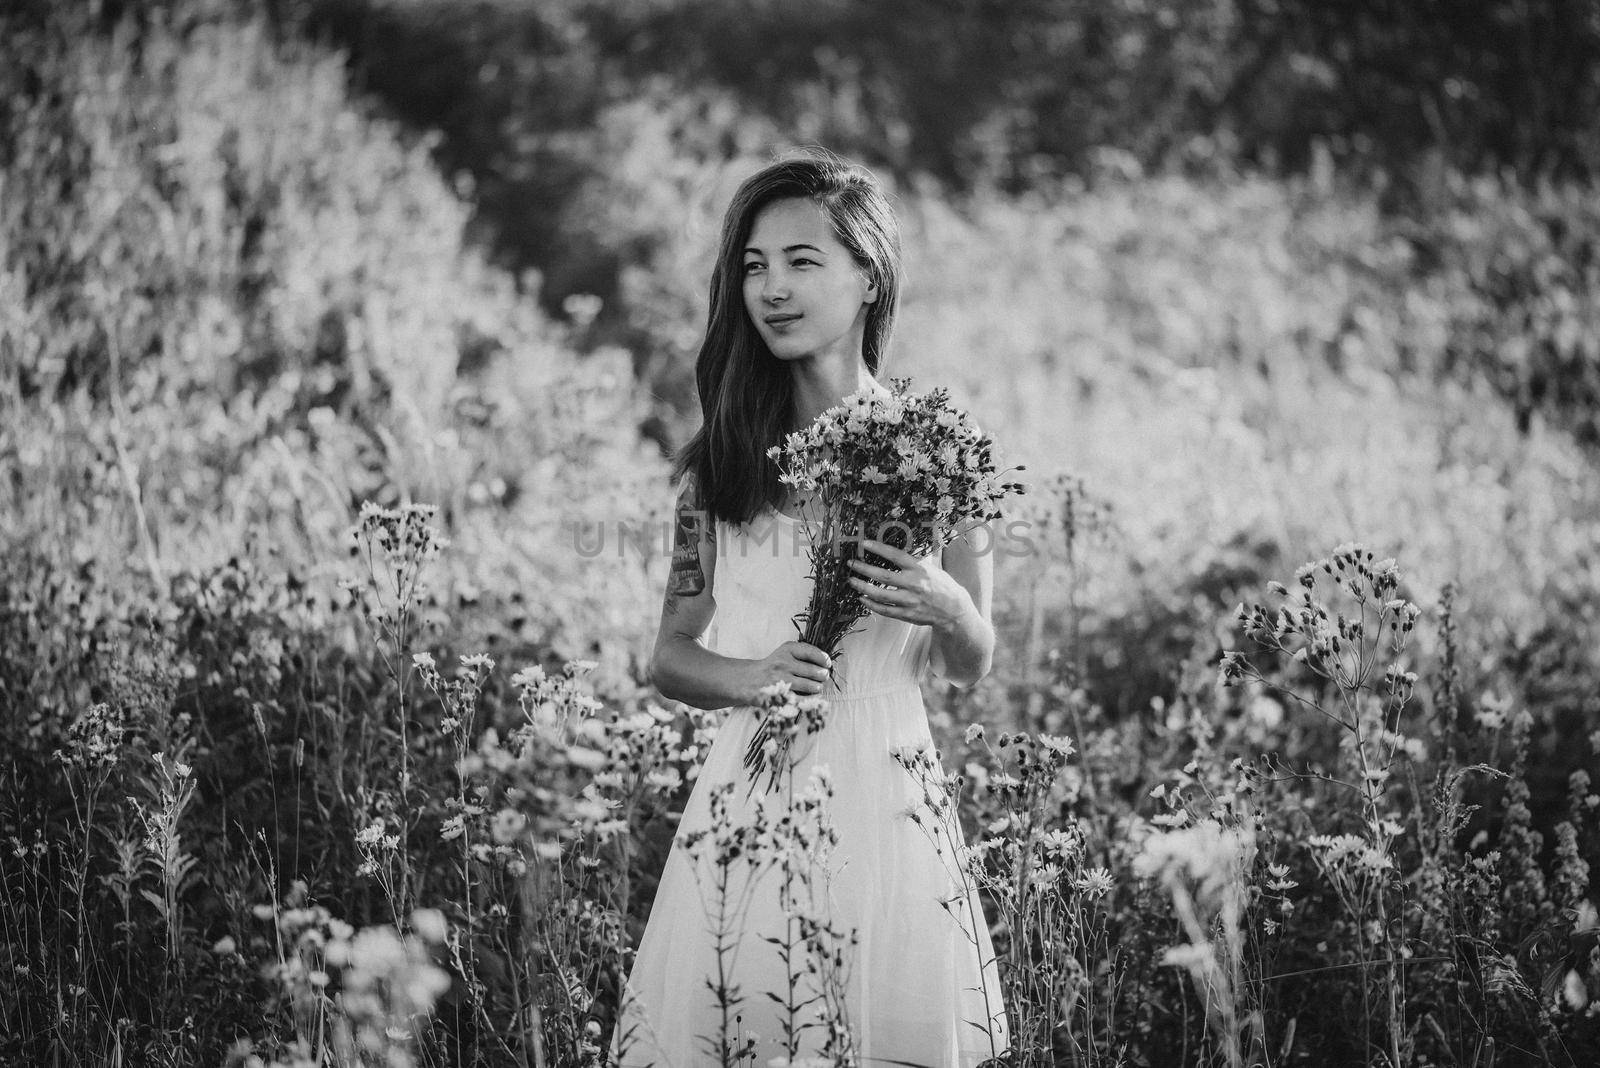 Beautiful young woman with blue hair and bouquet walking on flower field in summer. Black and white image. Effect film grain